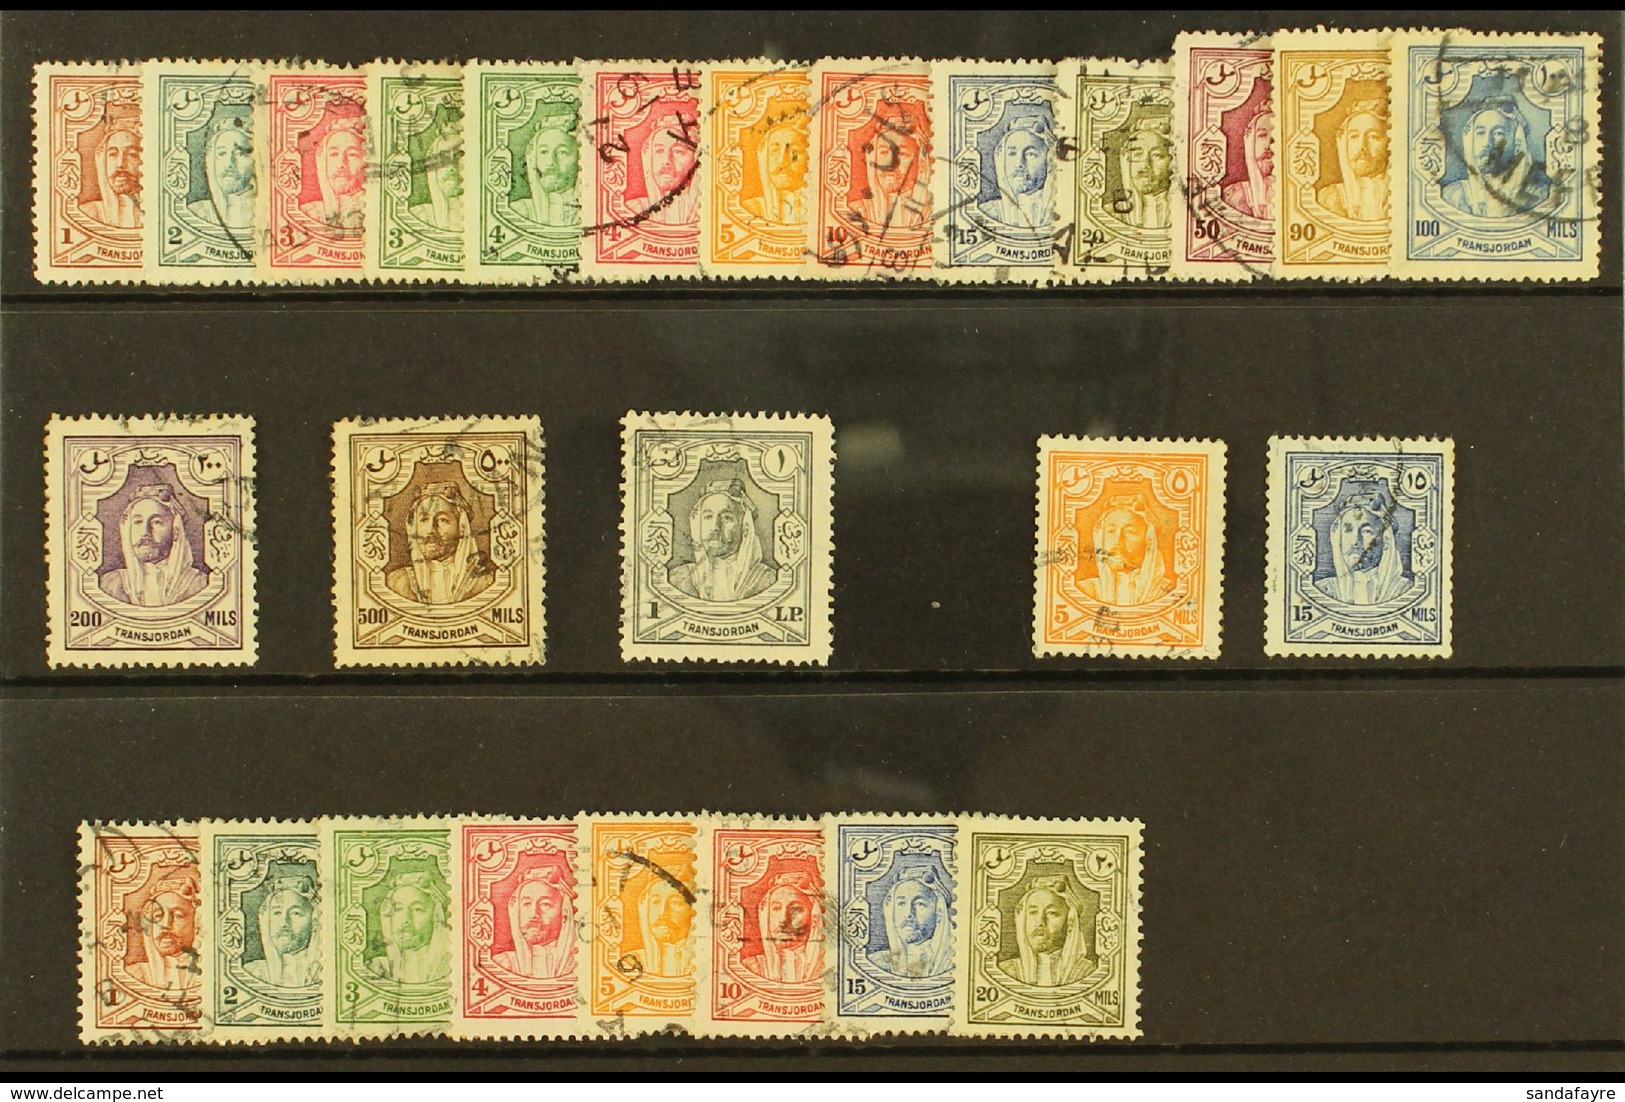 1930 Emir Set Re-engraved Complete Including All SG Listed Perf Types, SG 194b/207, Fine To Very Fine Used. (26 Stamps)  - Jordanien